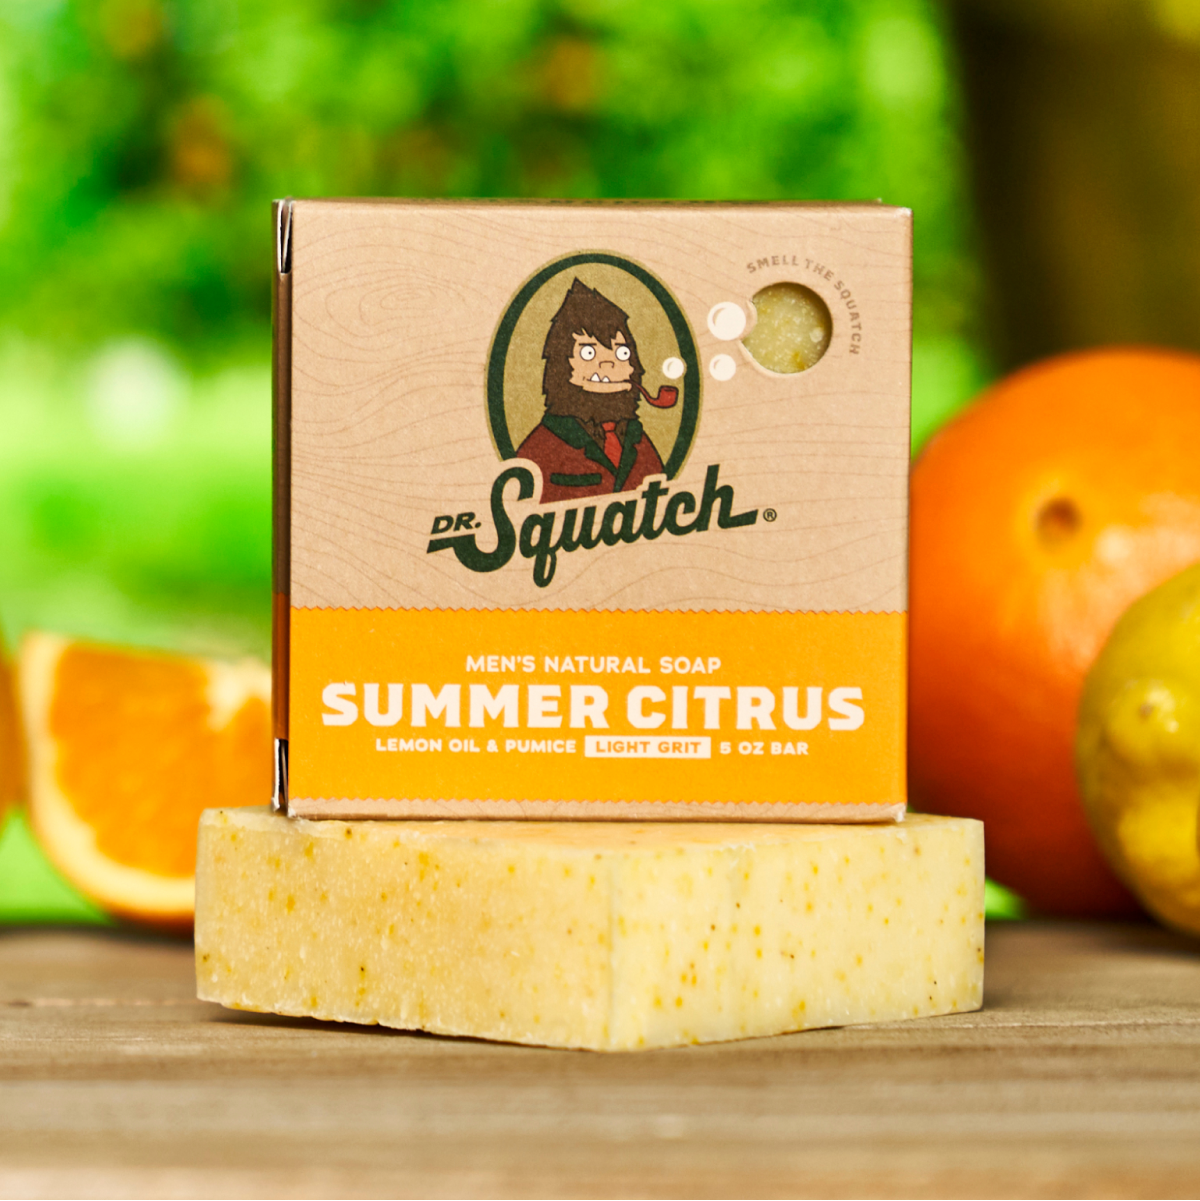 Dr. Squatch Manly Soap and Deodorant Variety Pack - Handmade with Organic  Oils, Aluminum-Free - Summer Citrus